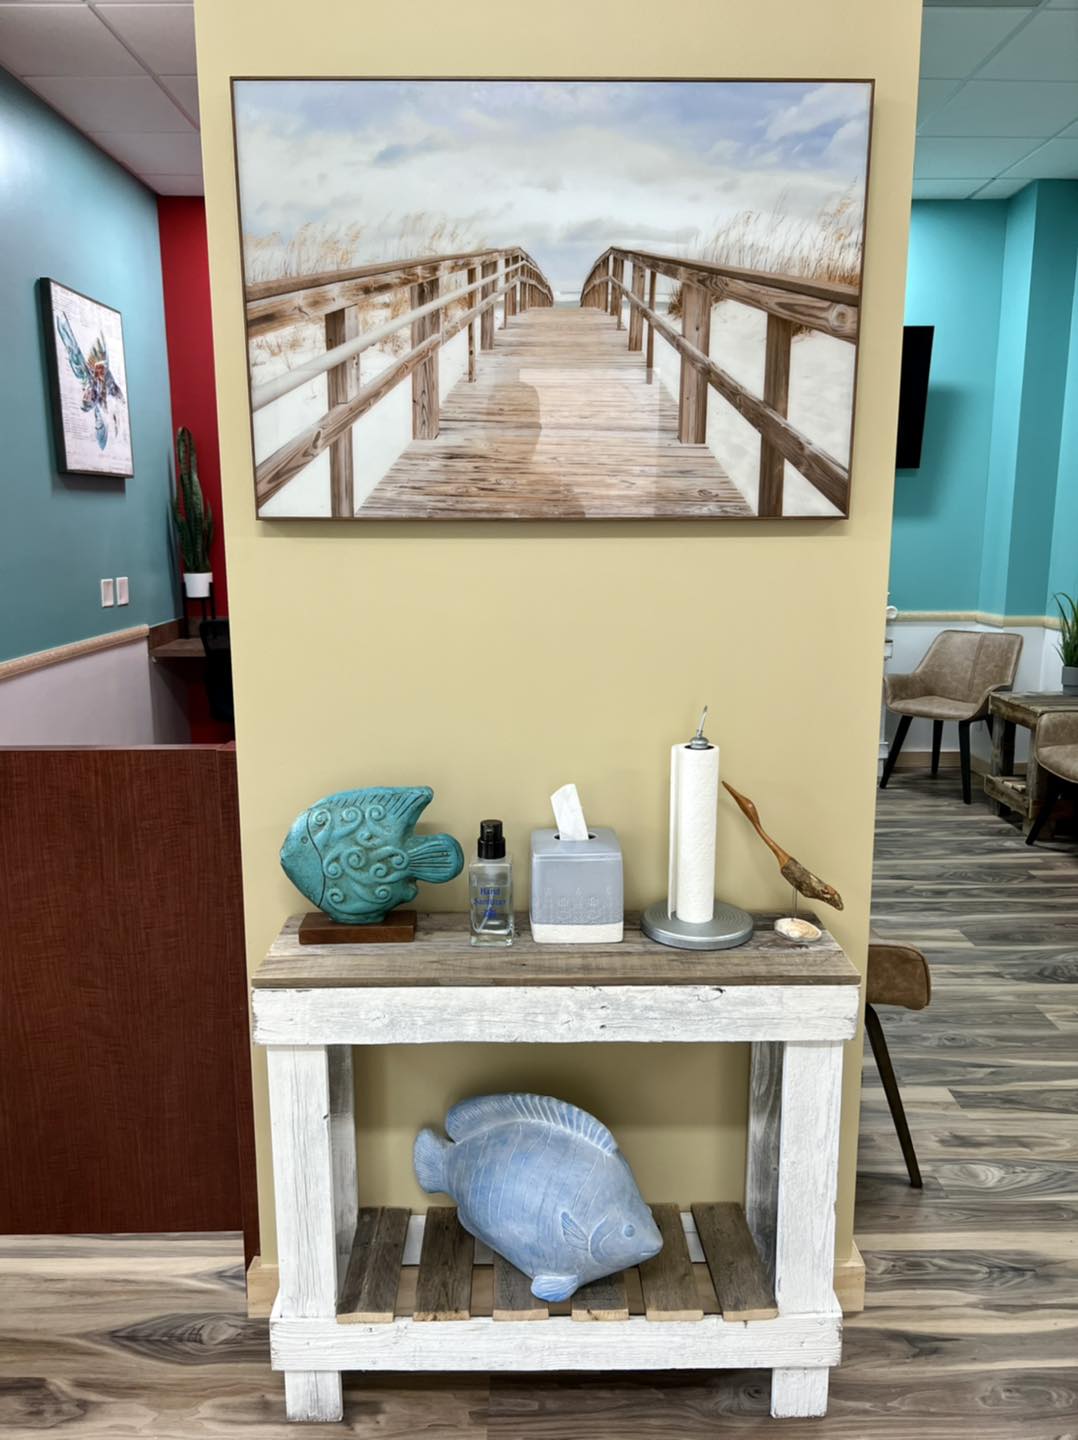 Saylor Physical Therapy - Tequesta